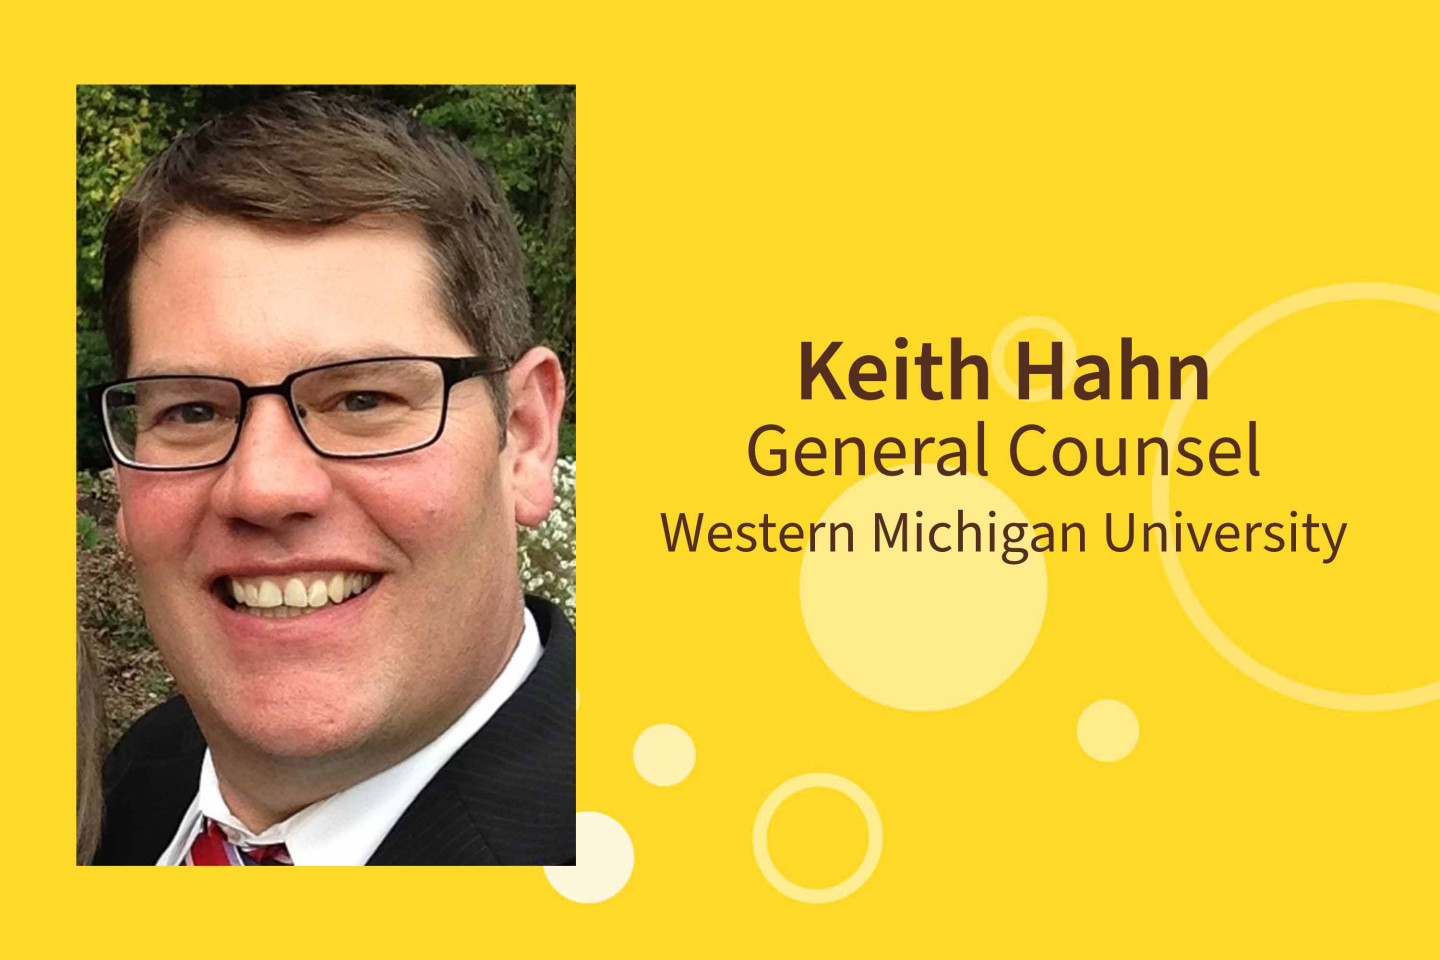 Keith Hahn, General Counsel, Western Michigan University